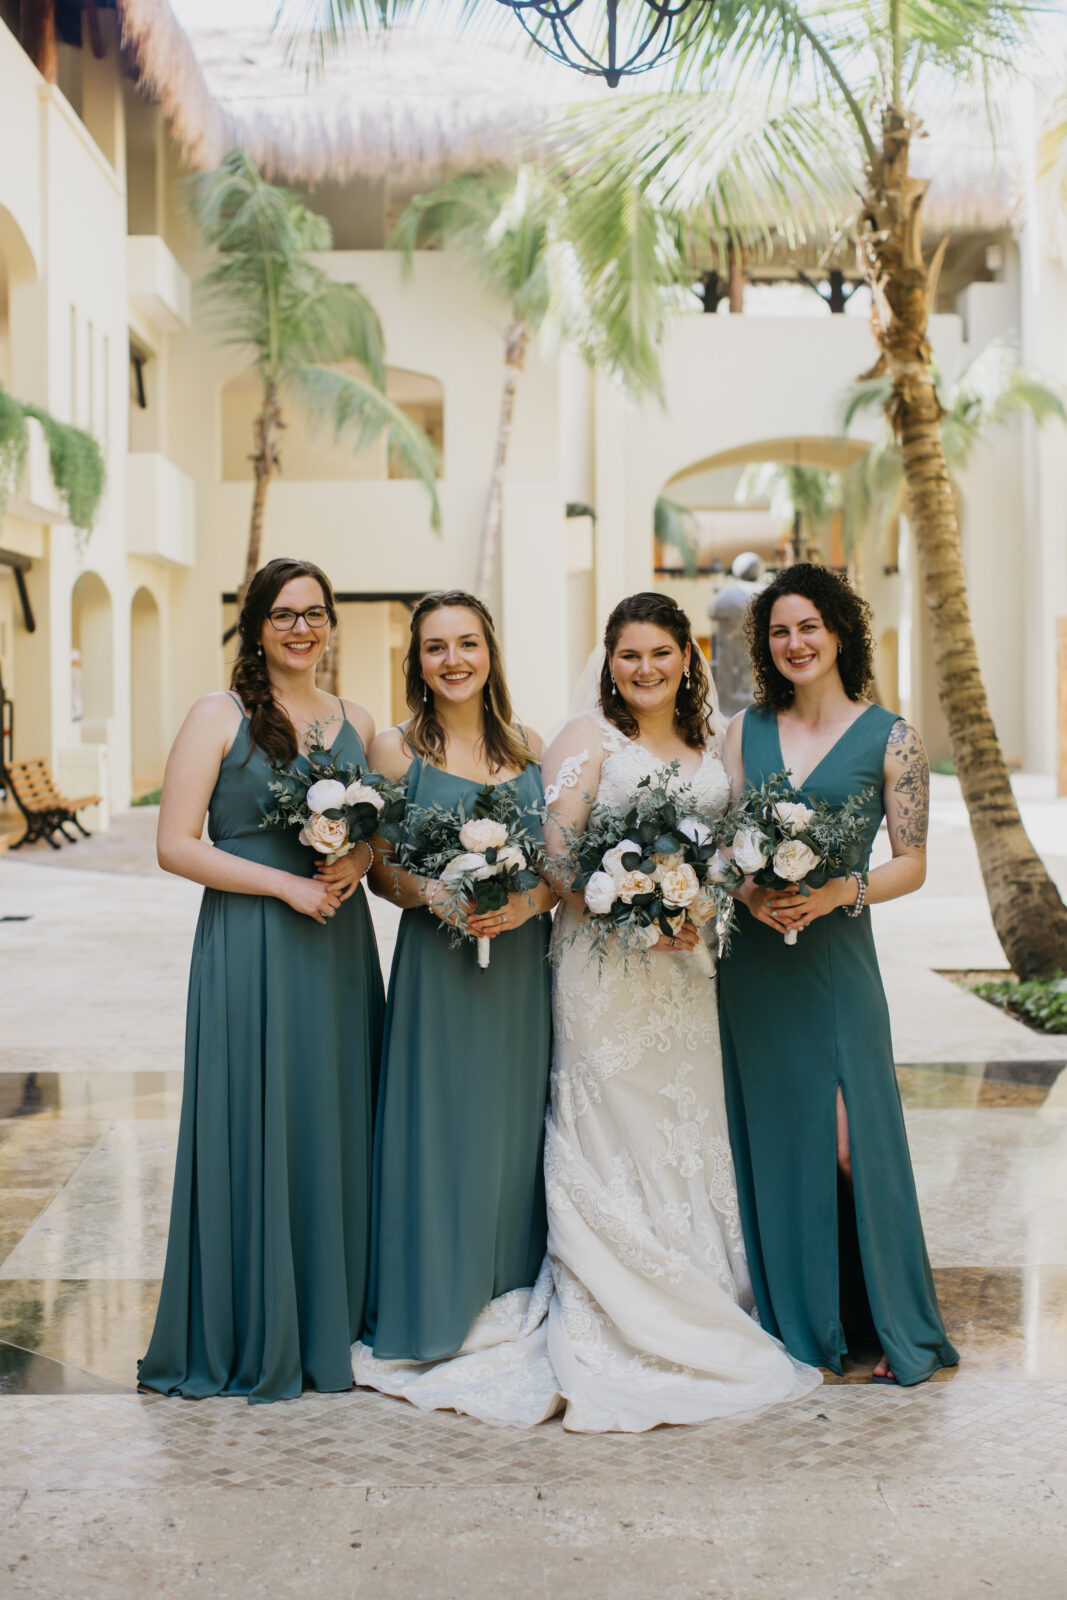 A photo of the bride and her bridesmaids